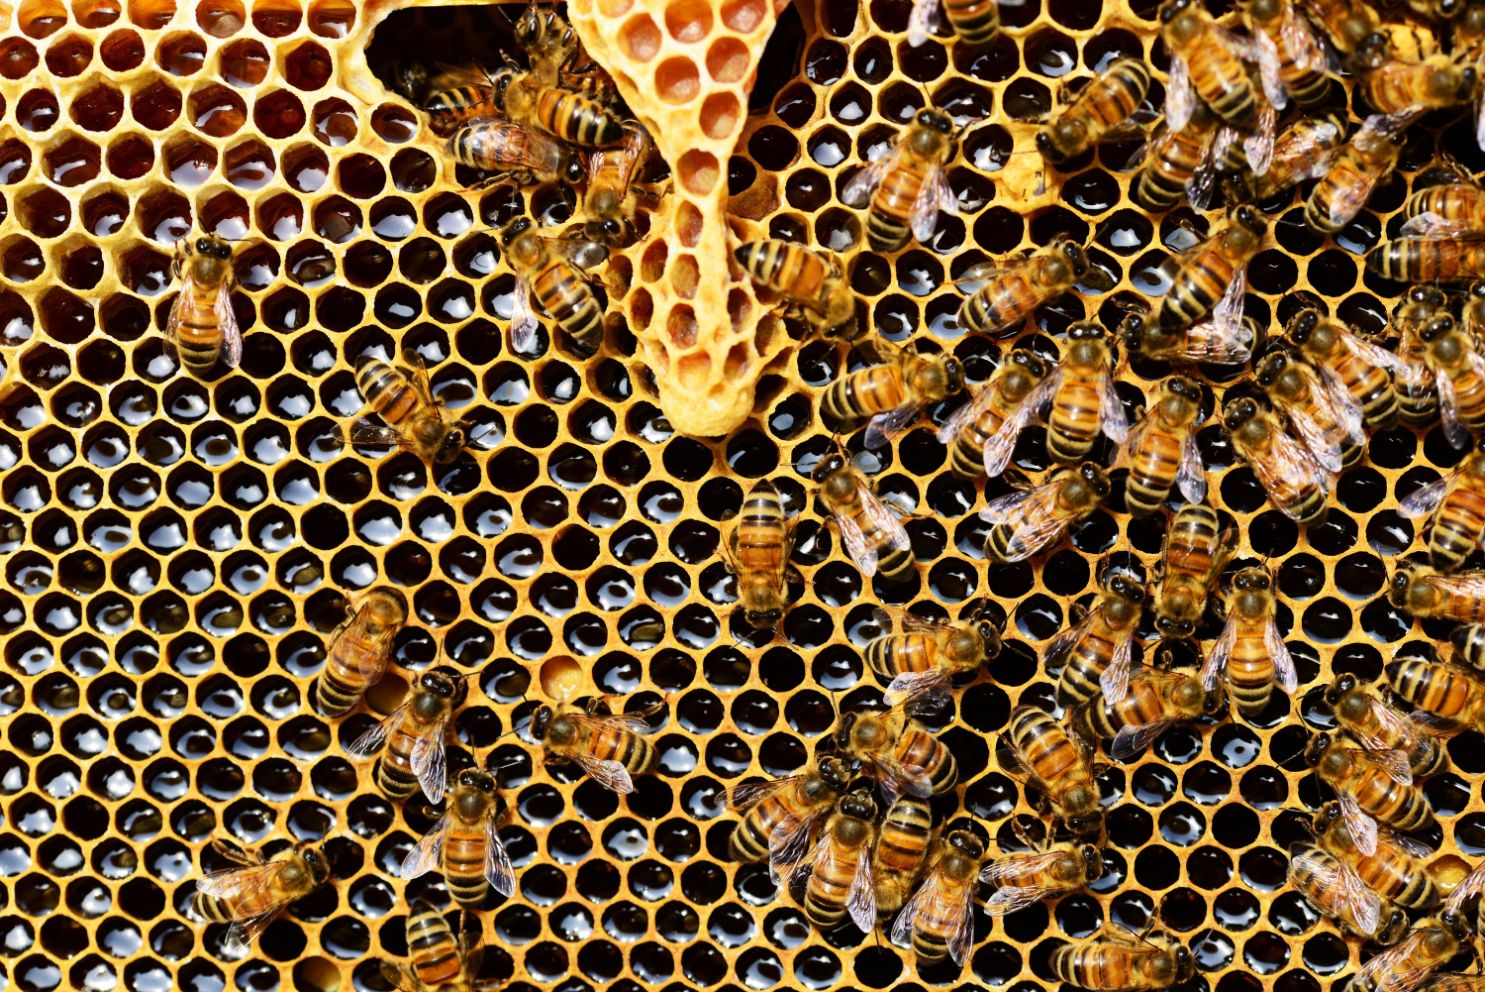 A close up of bees on honeycomb with one bee in the middle.